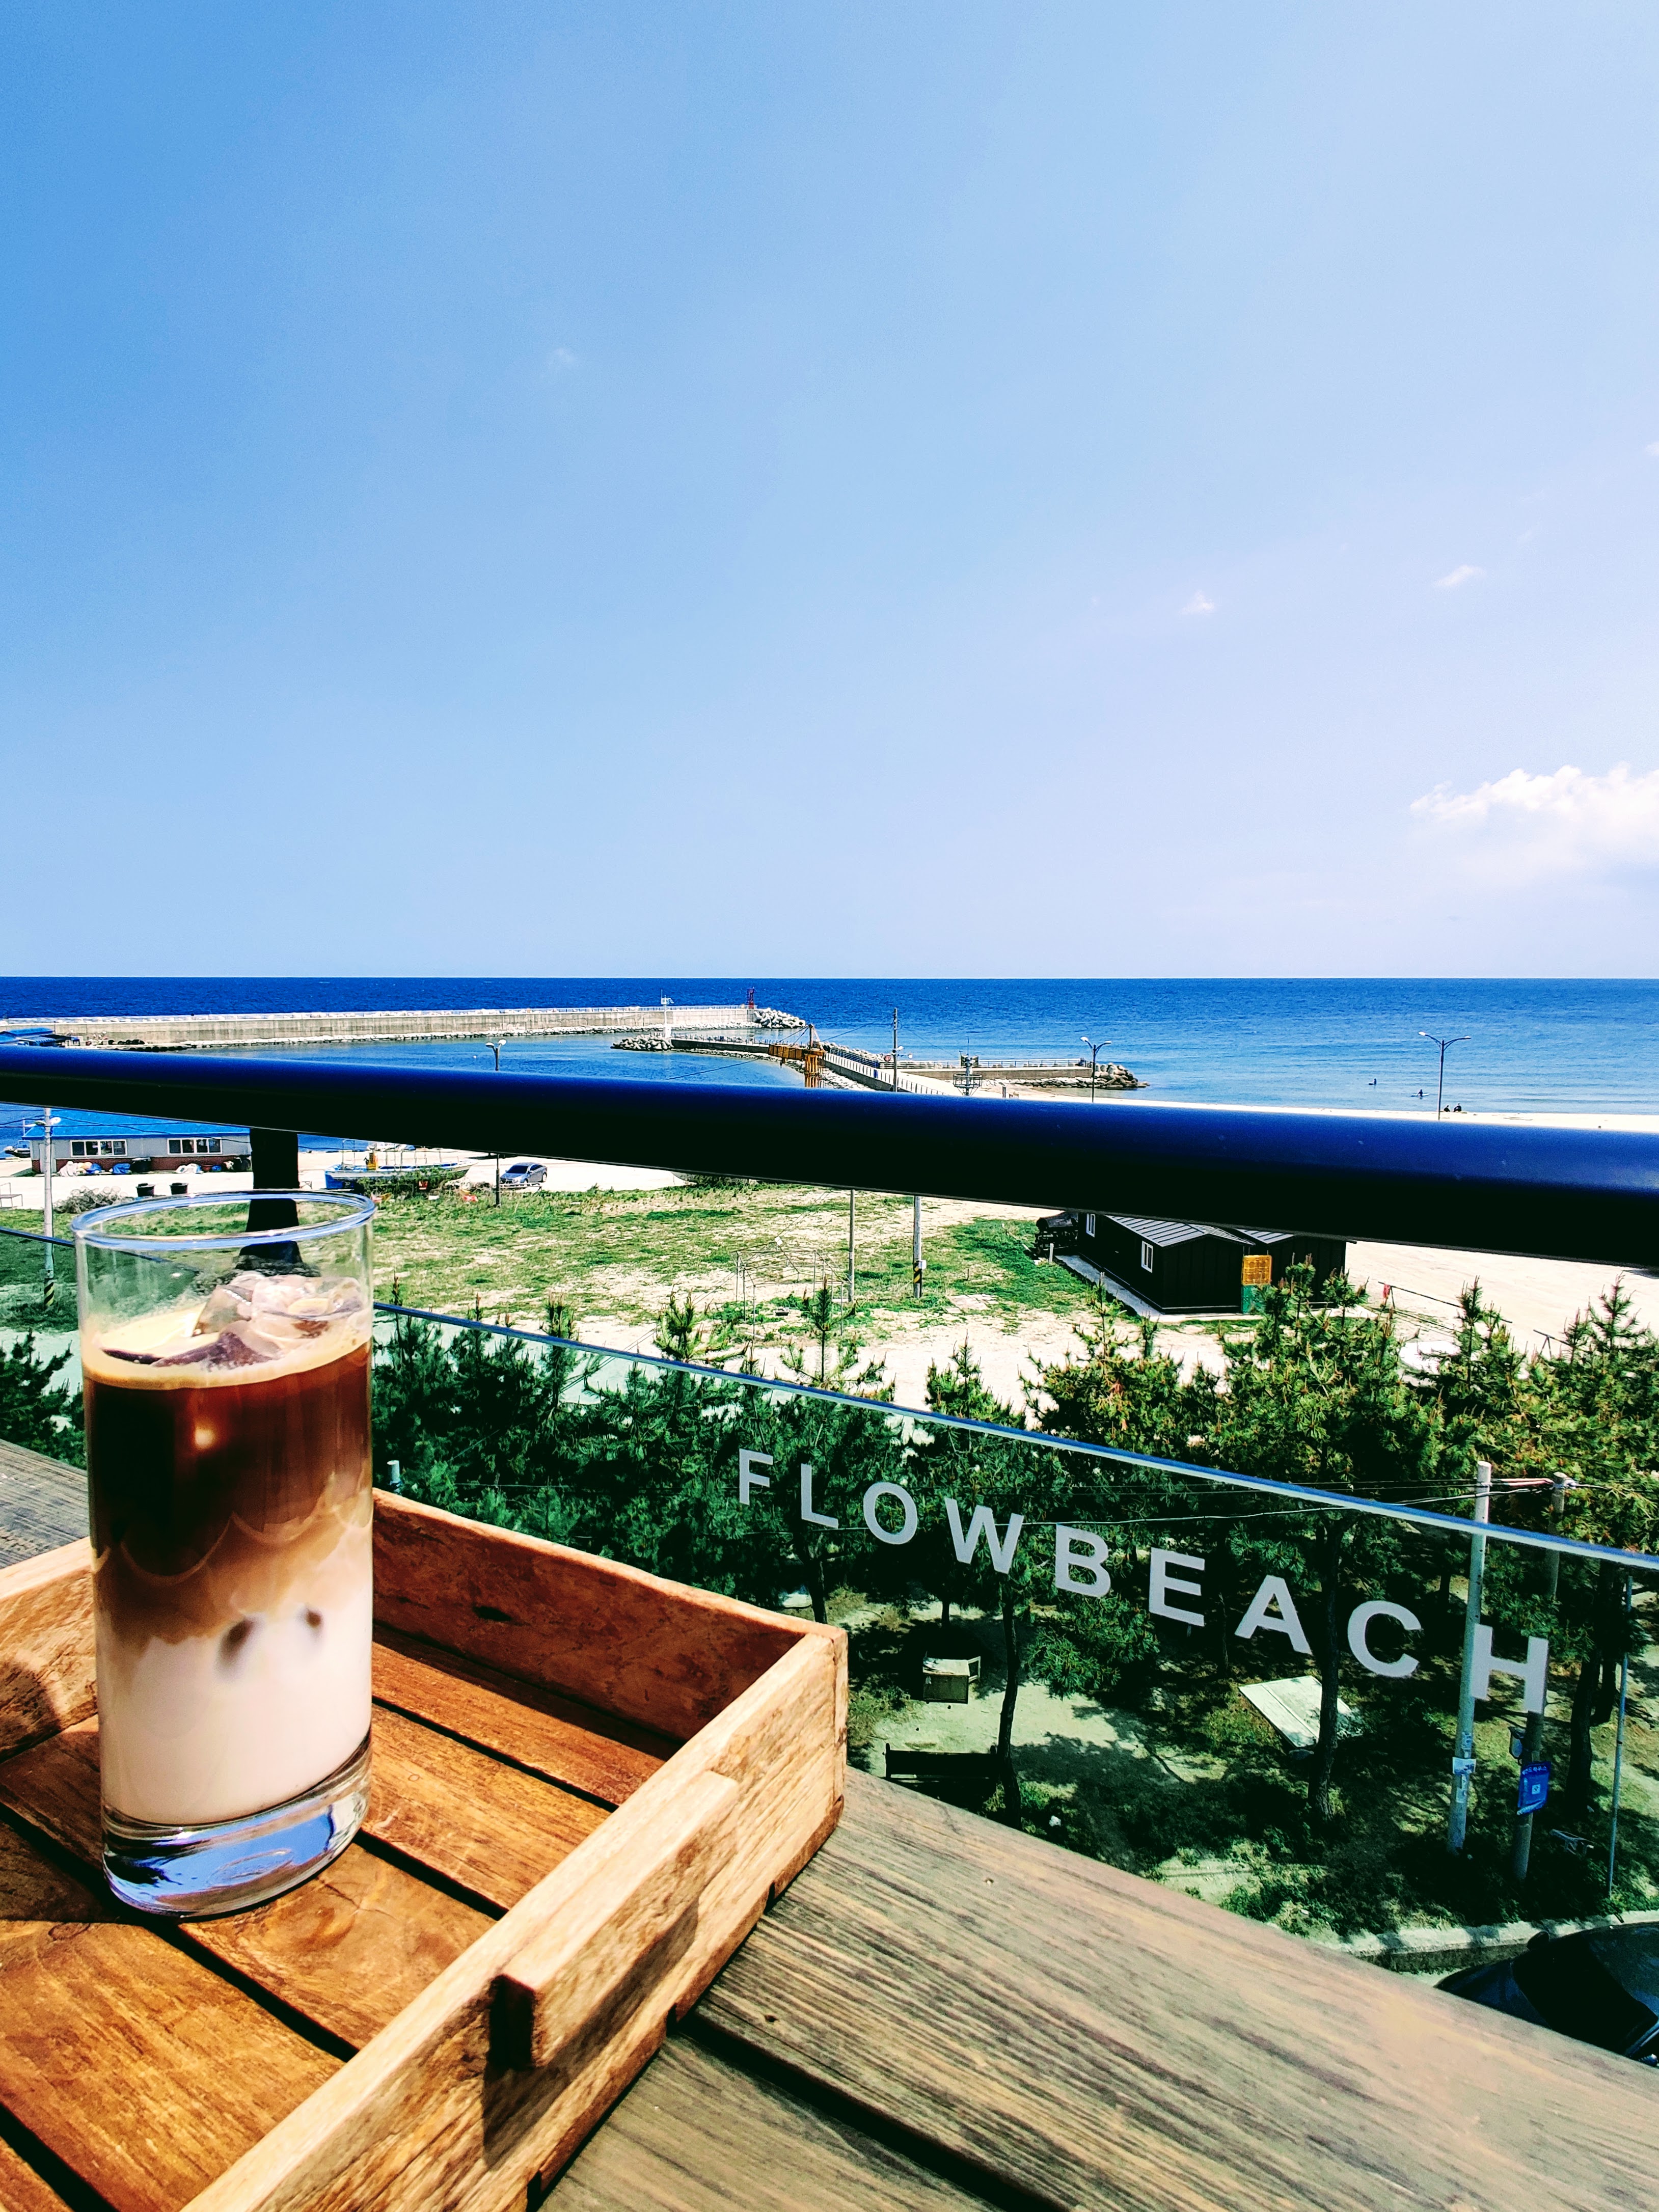 The view from Flowbeach Cafe in Yangyang, South Korea for a Guide for Sokcho and Seoraksan